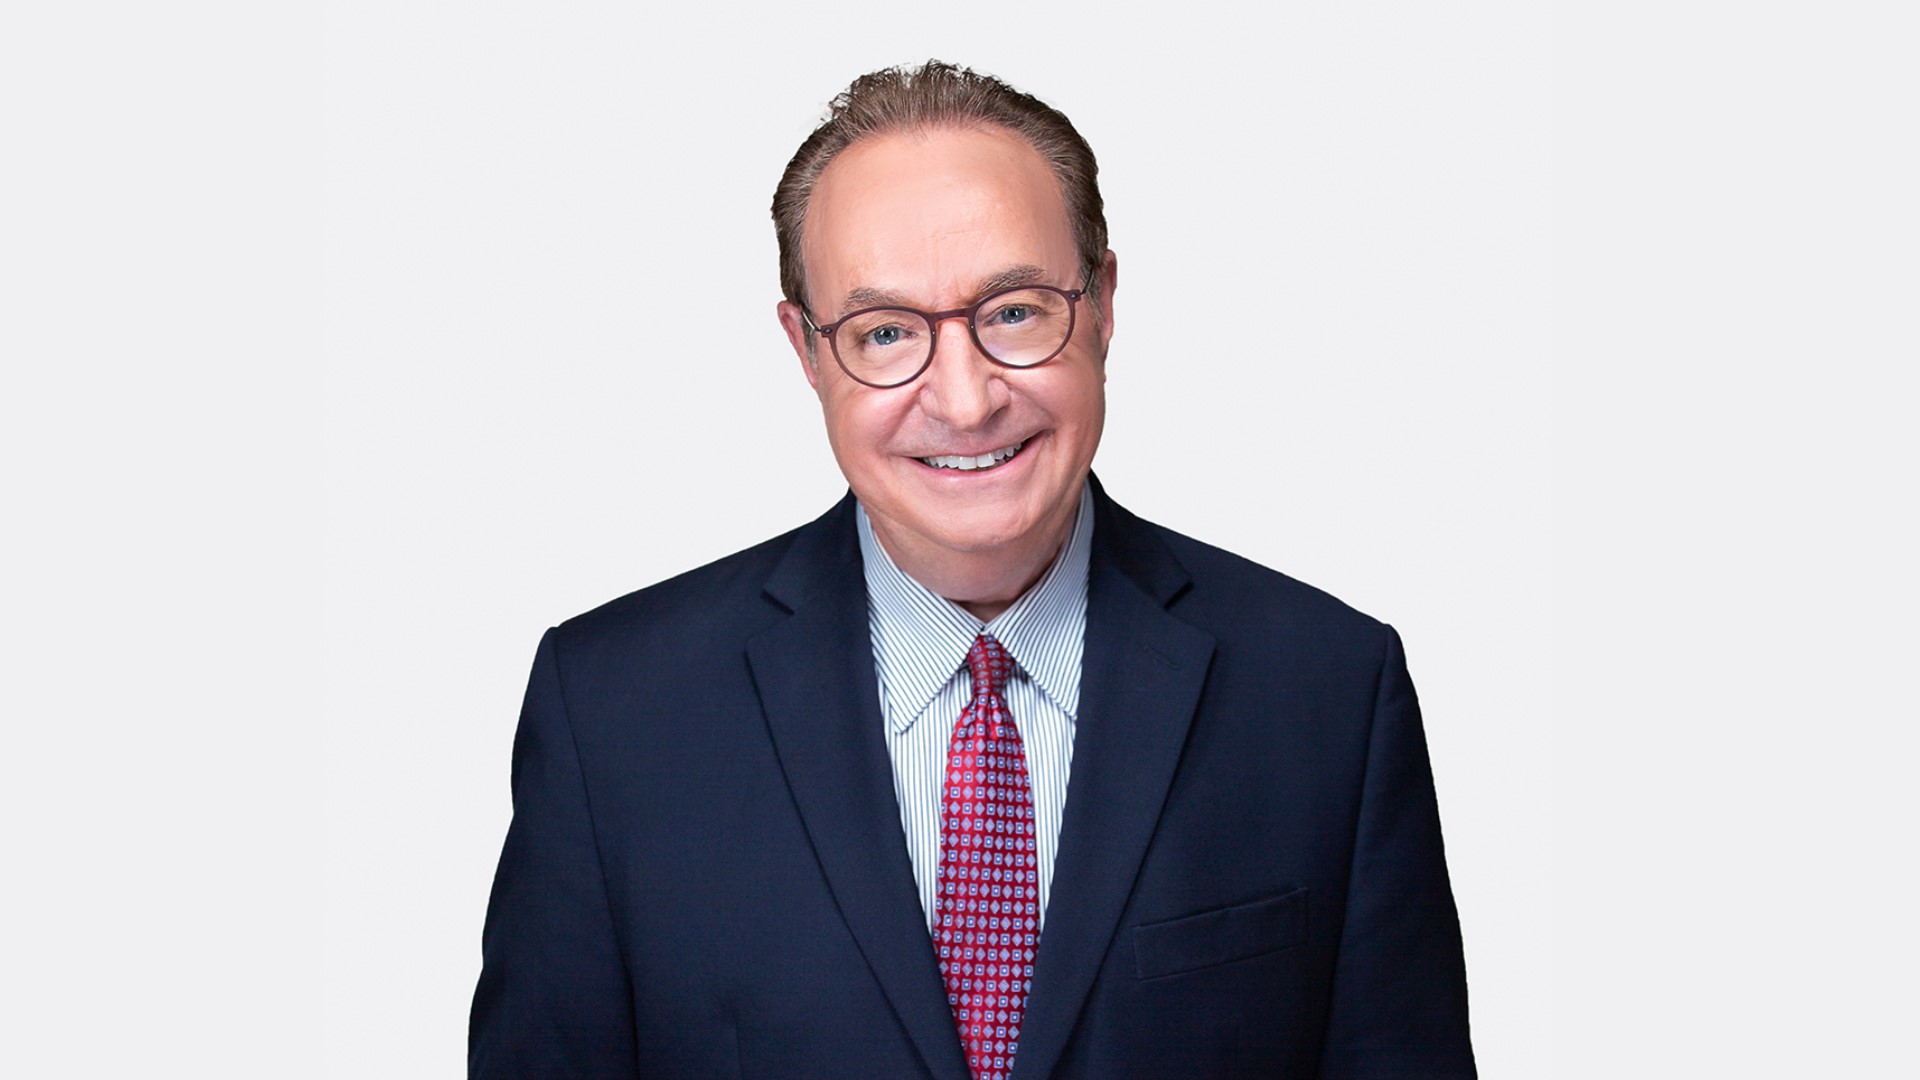 Legendary TV anchor and journalist Gary Shapiro will retire in December of 2022 after four decades on the air.